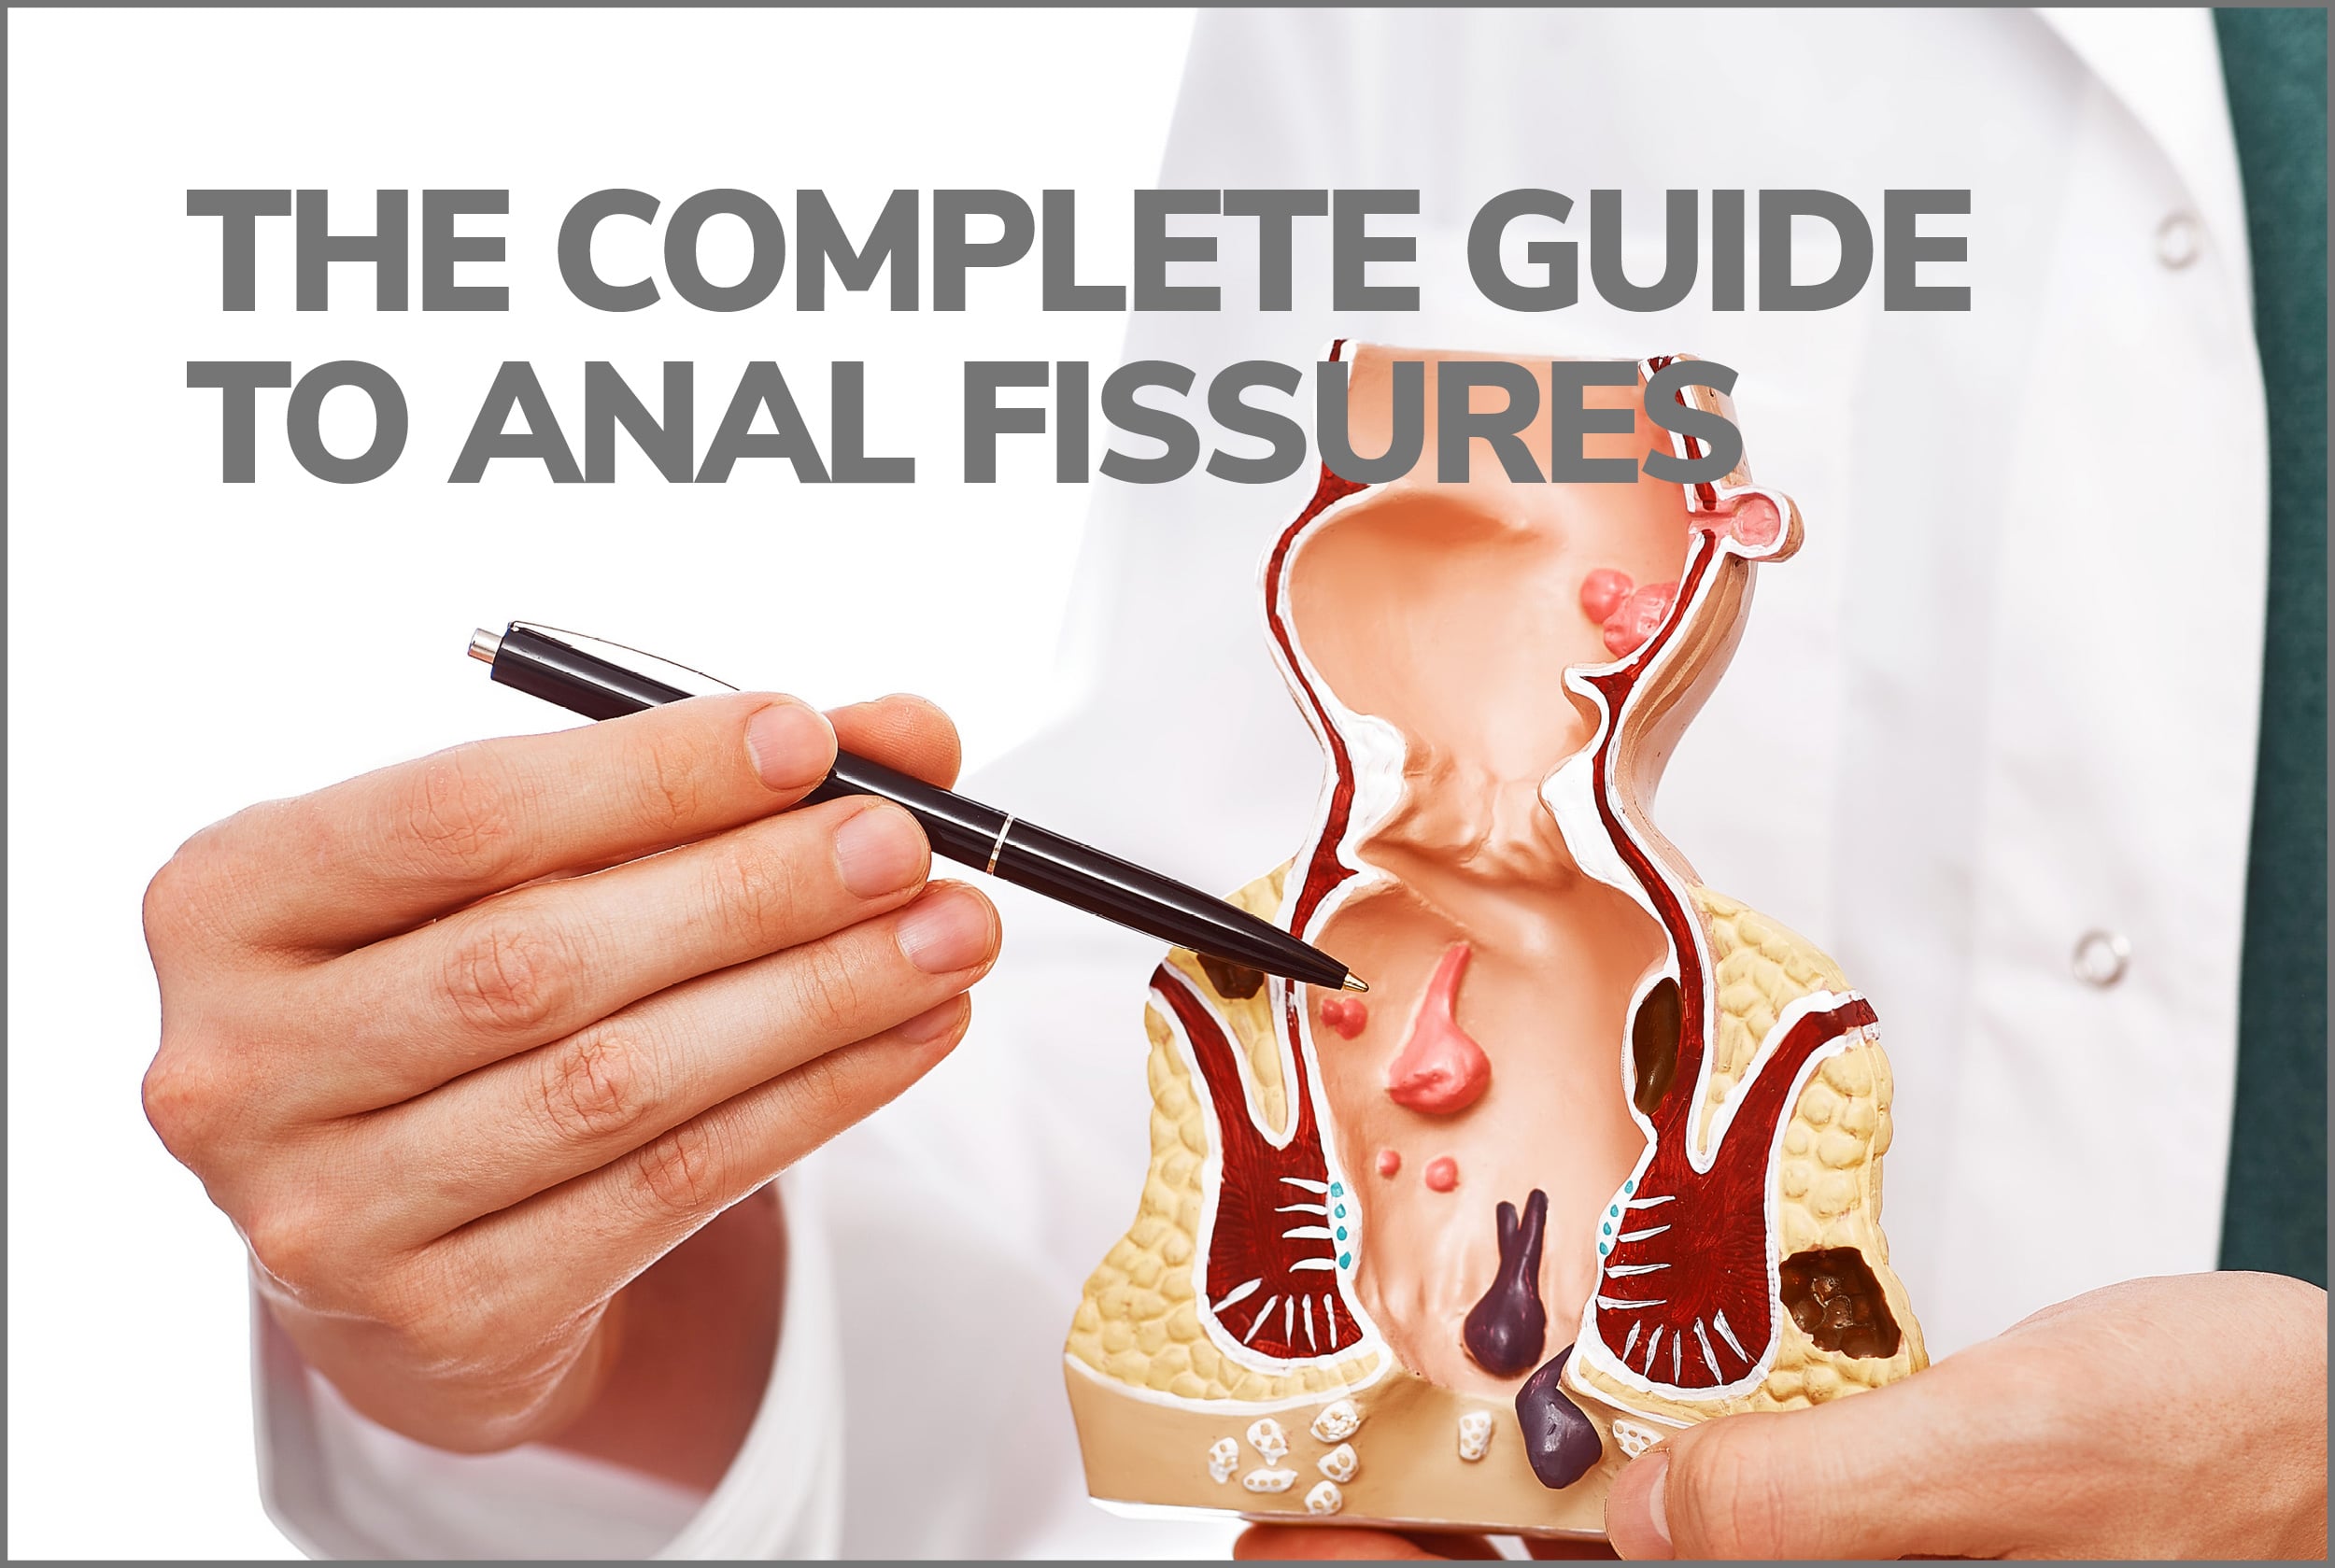 The Complete Guide to Anal Fissures